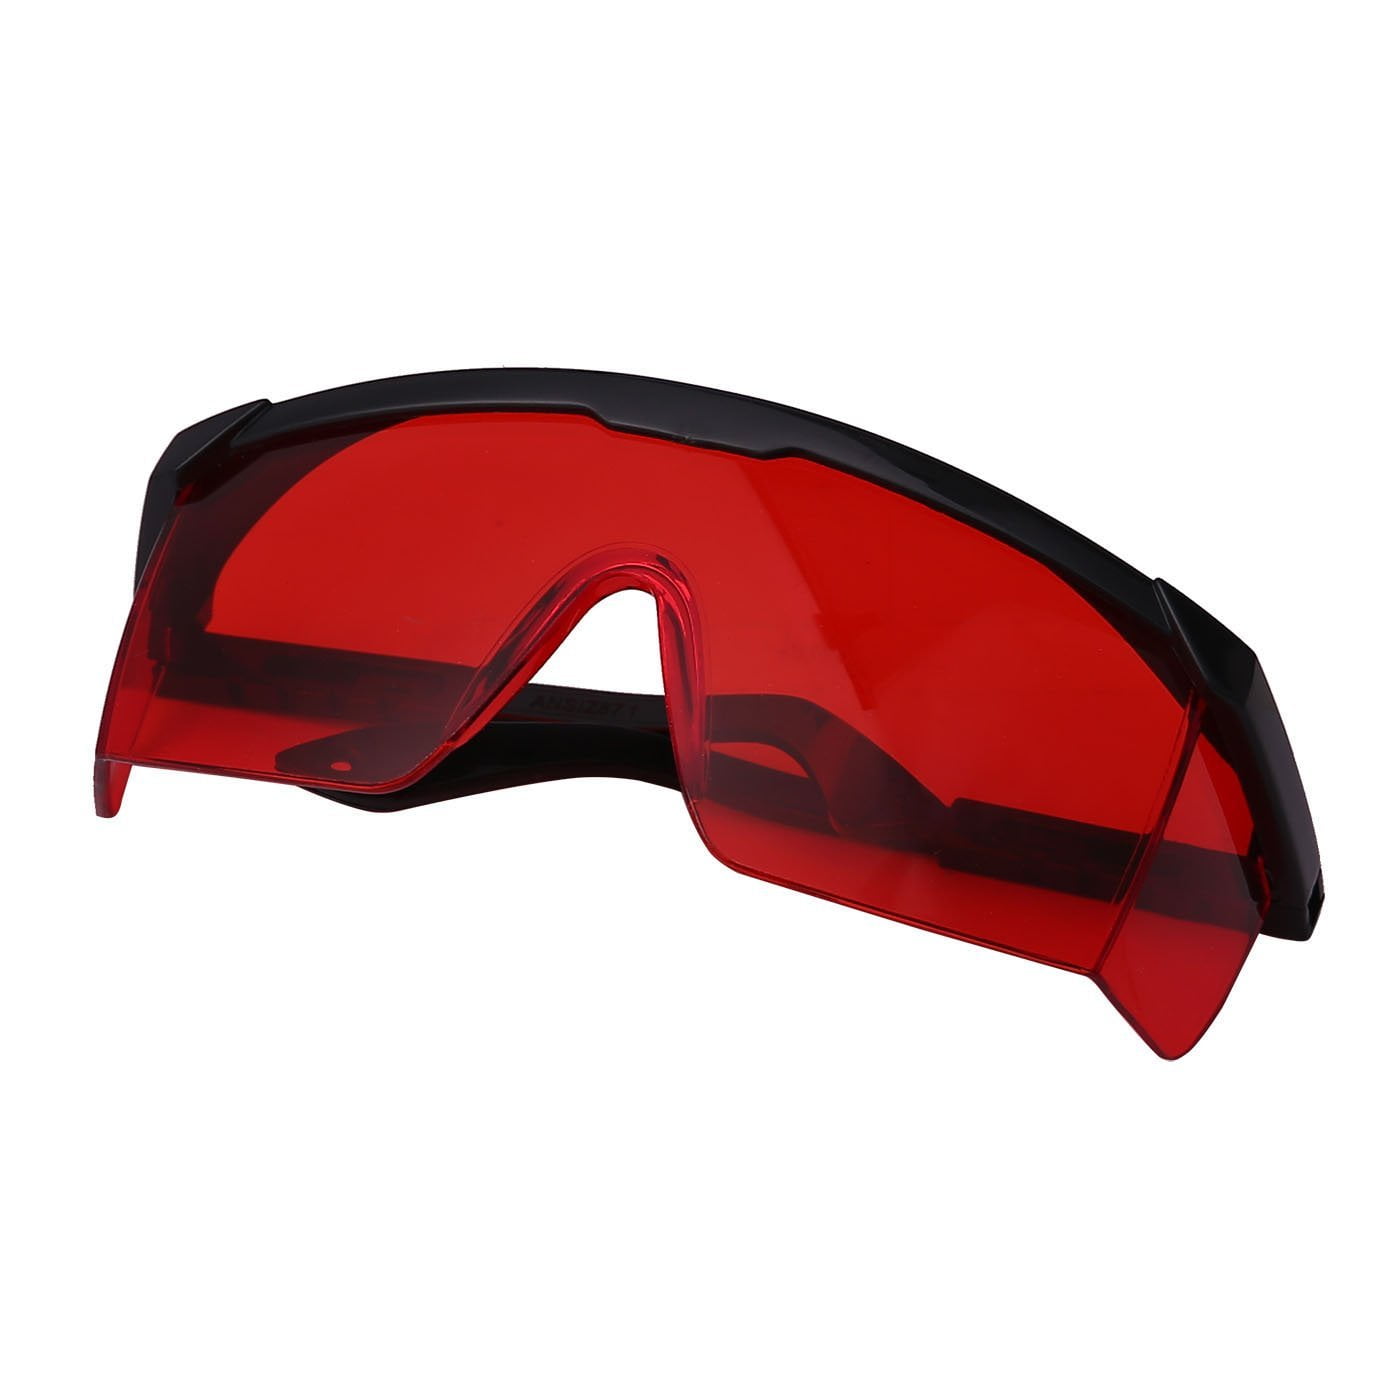 Protection Goggles Laser Safety Glasses Colorful Eye Spectacles Protective USA 